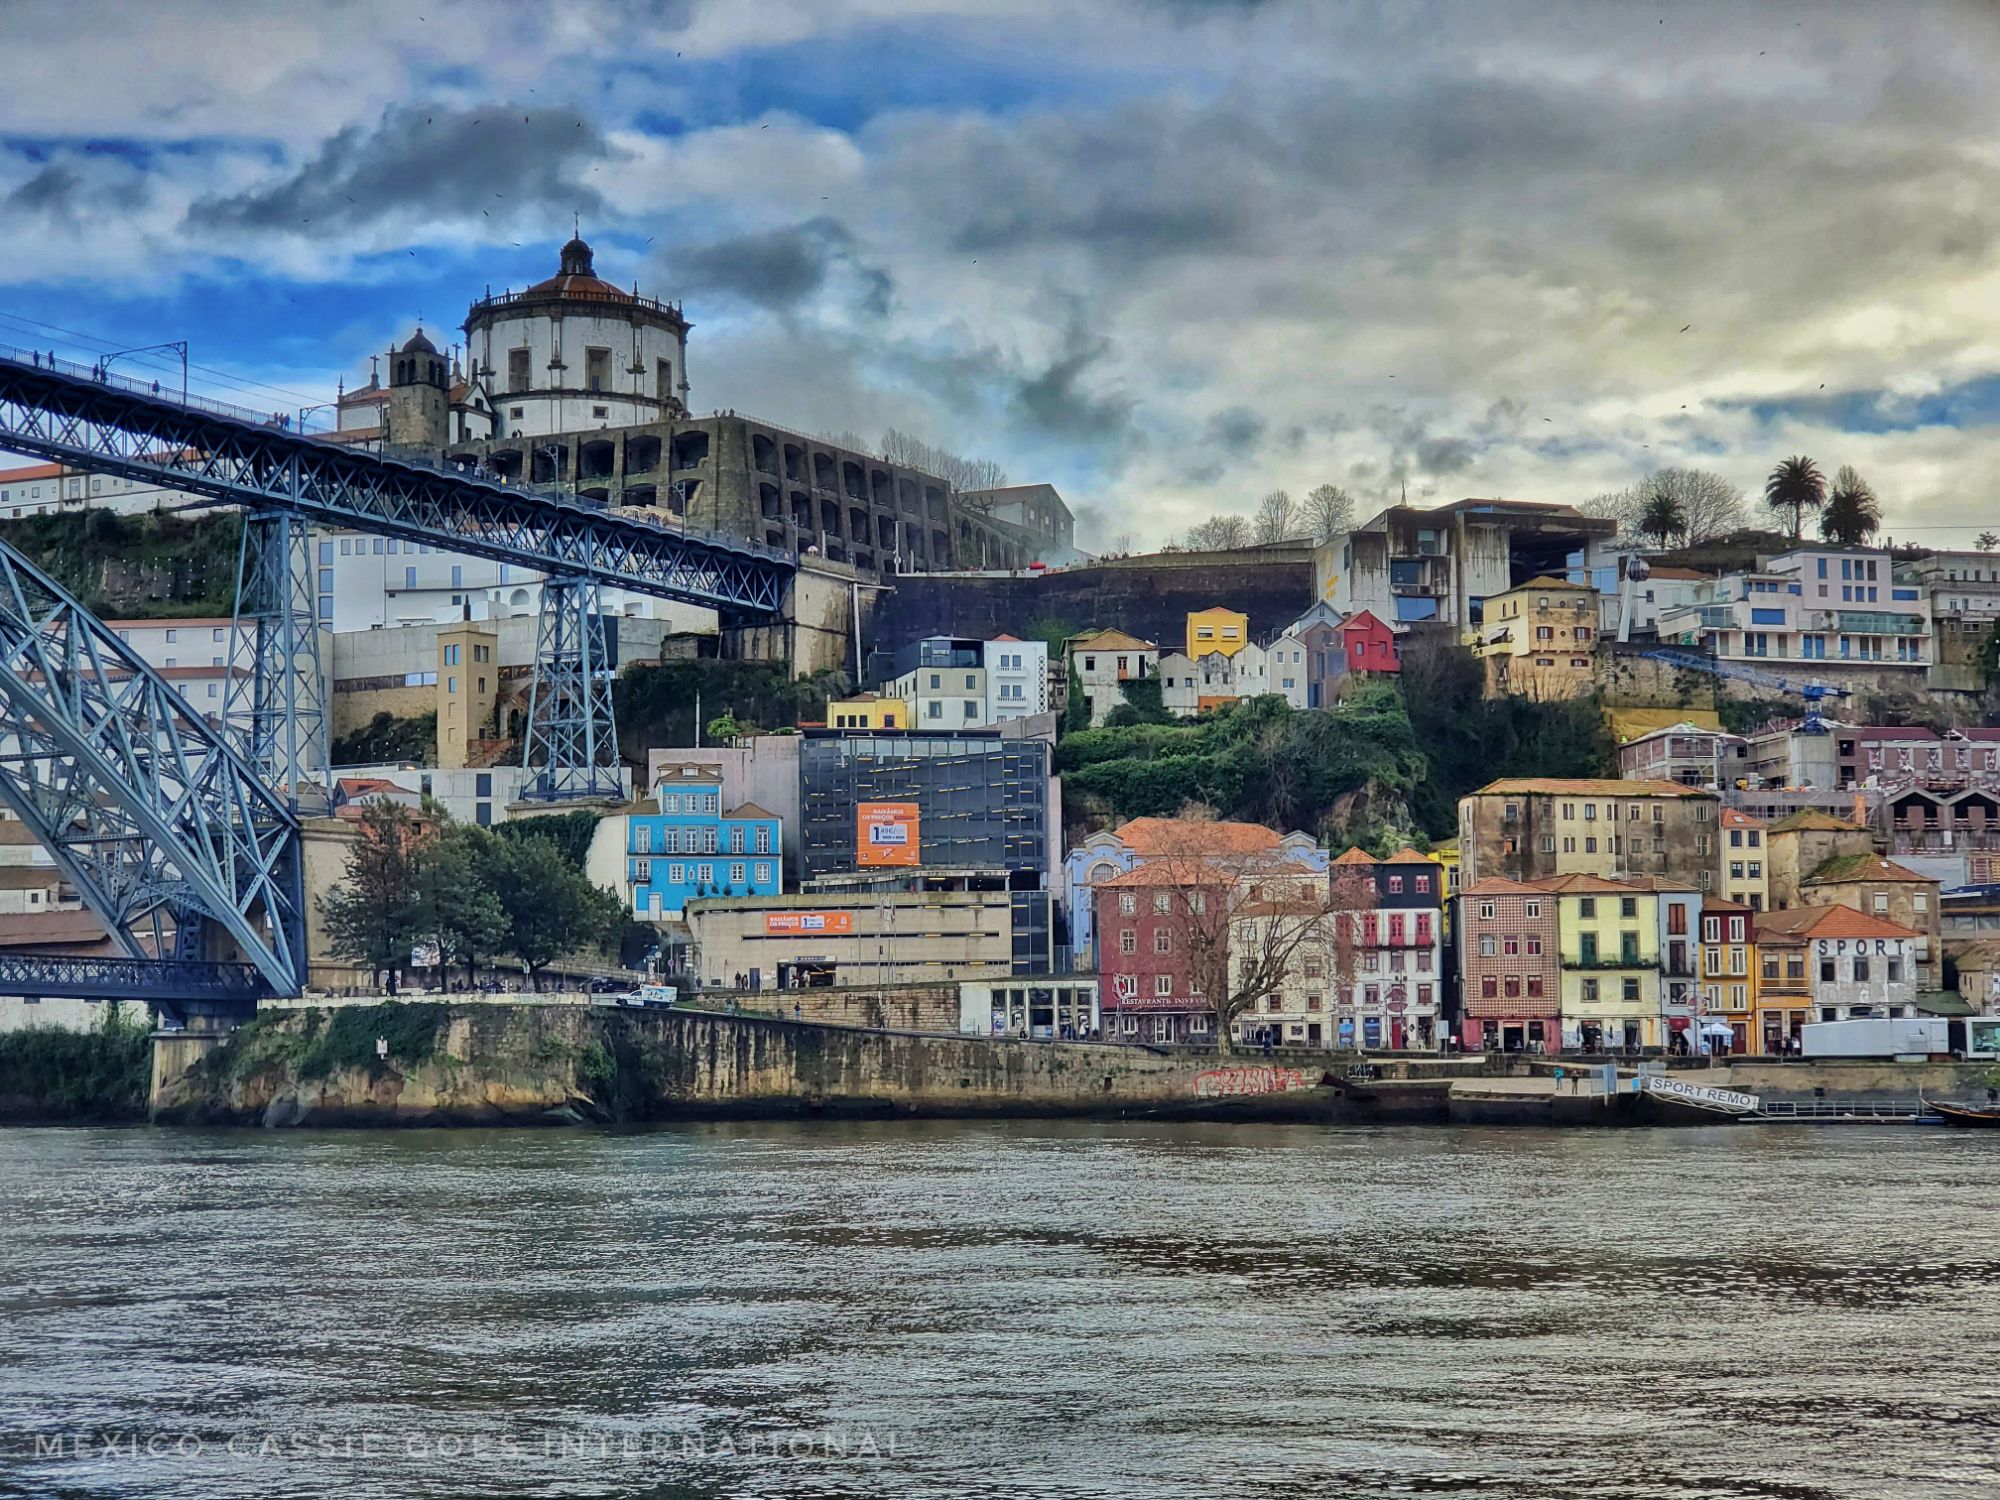 view of Gaia from Porto over the river- Edge of bridge visible on left side of screen. houses are all very colourful